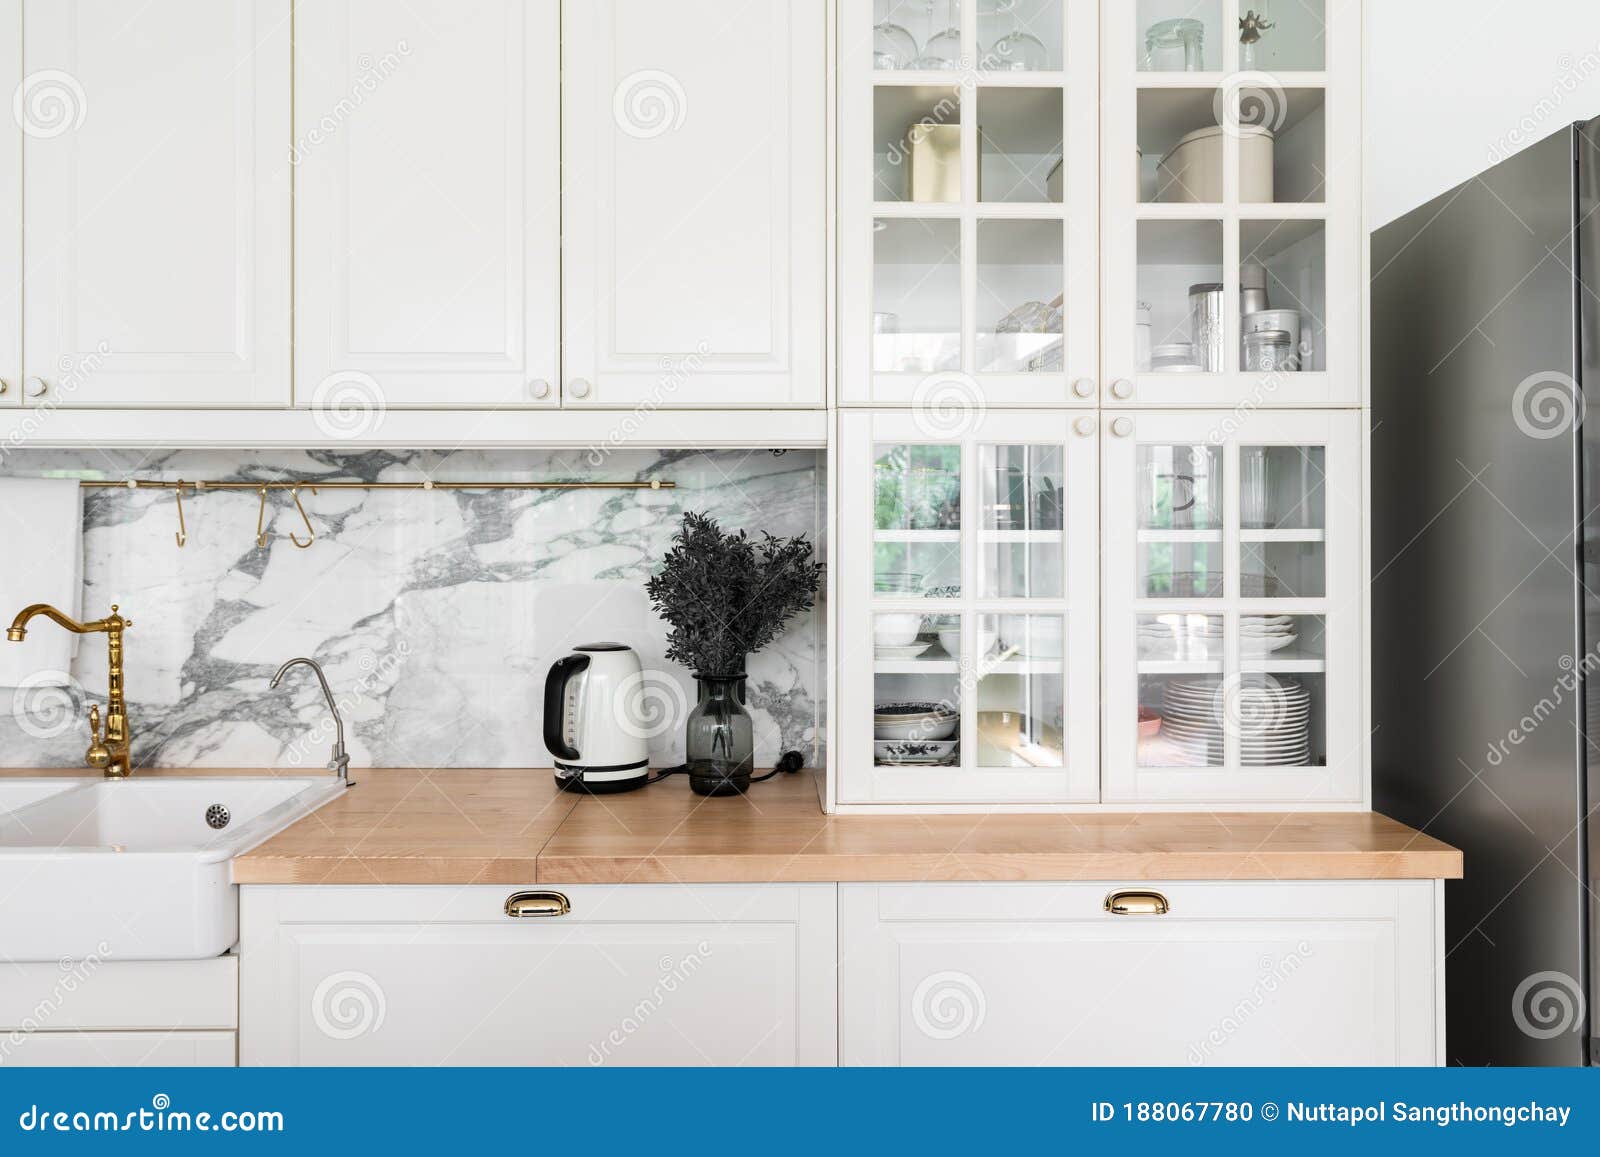 Modern Classic Kitchen Interior With Kitchen Appliances And White Ceramic Sink With Gold Mirror Faucet On Wood Top With Marble Stock Photo Image Of Board Cutting 188067780